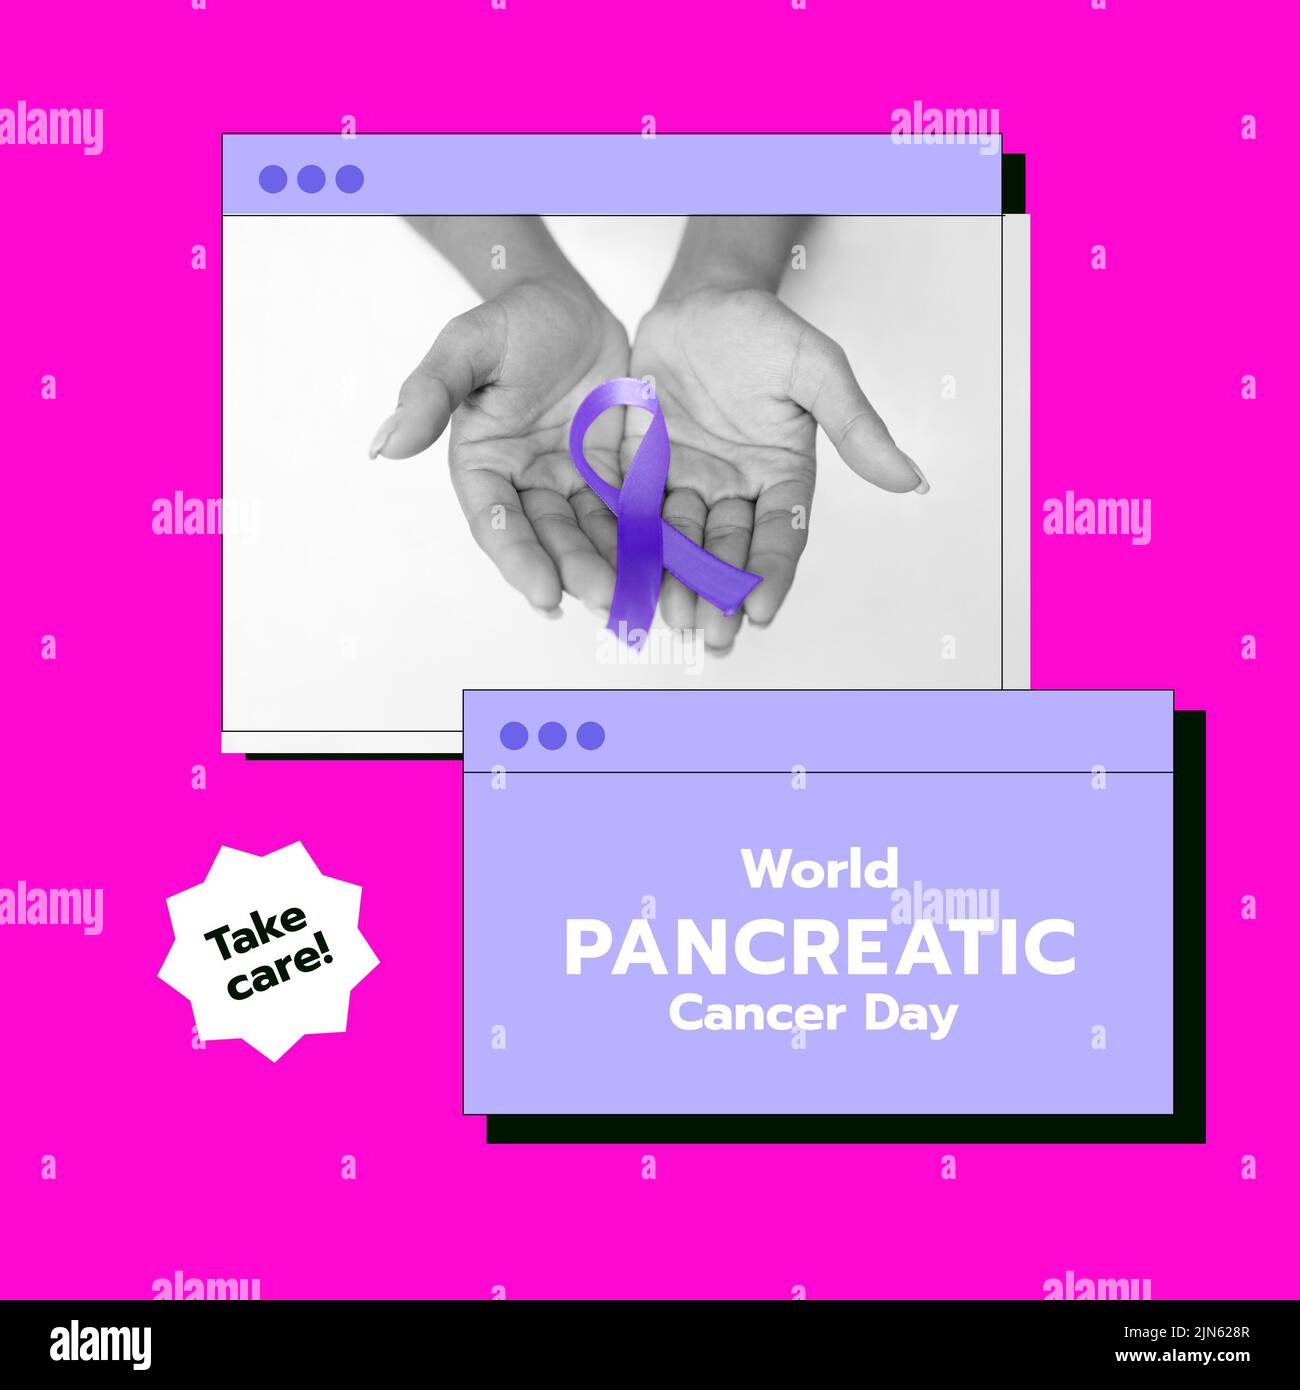 Composition of world pancreatic cancer day text with hand holding purple ribbon on pink background Stock Photo